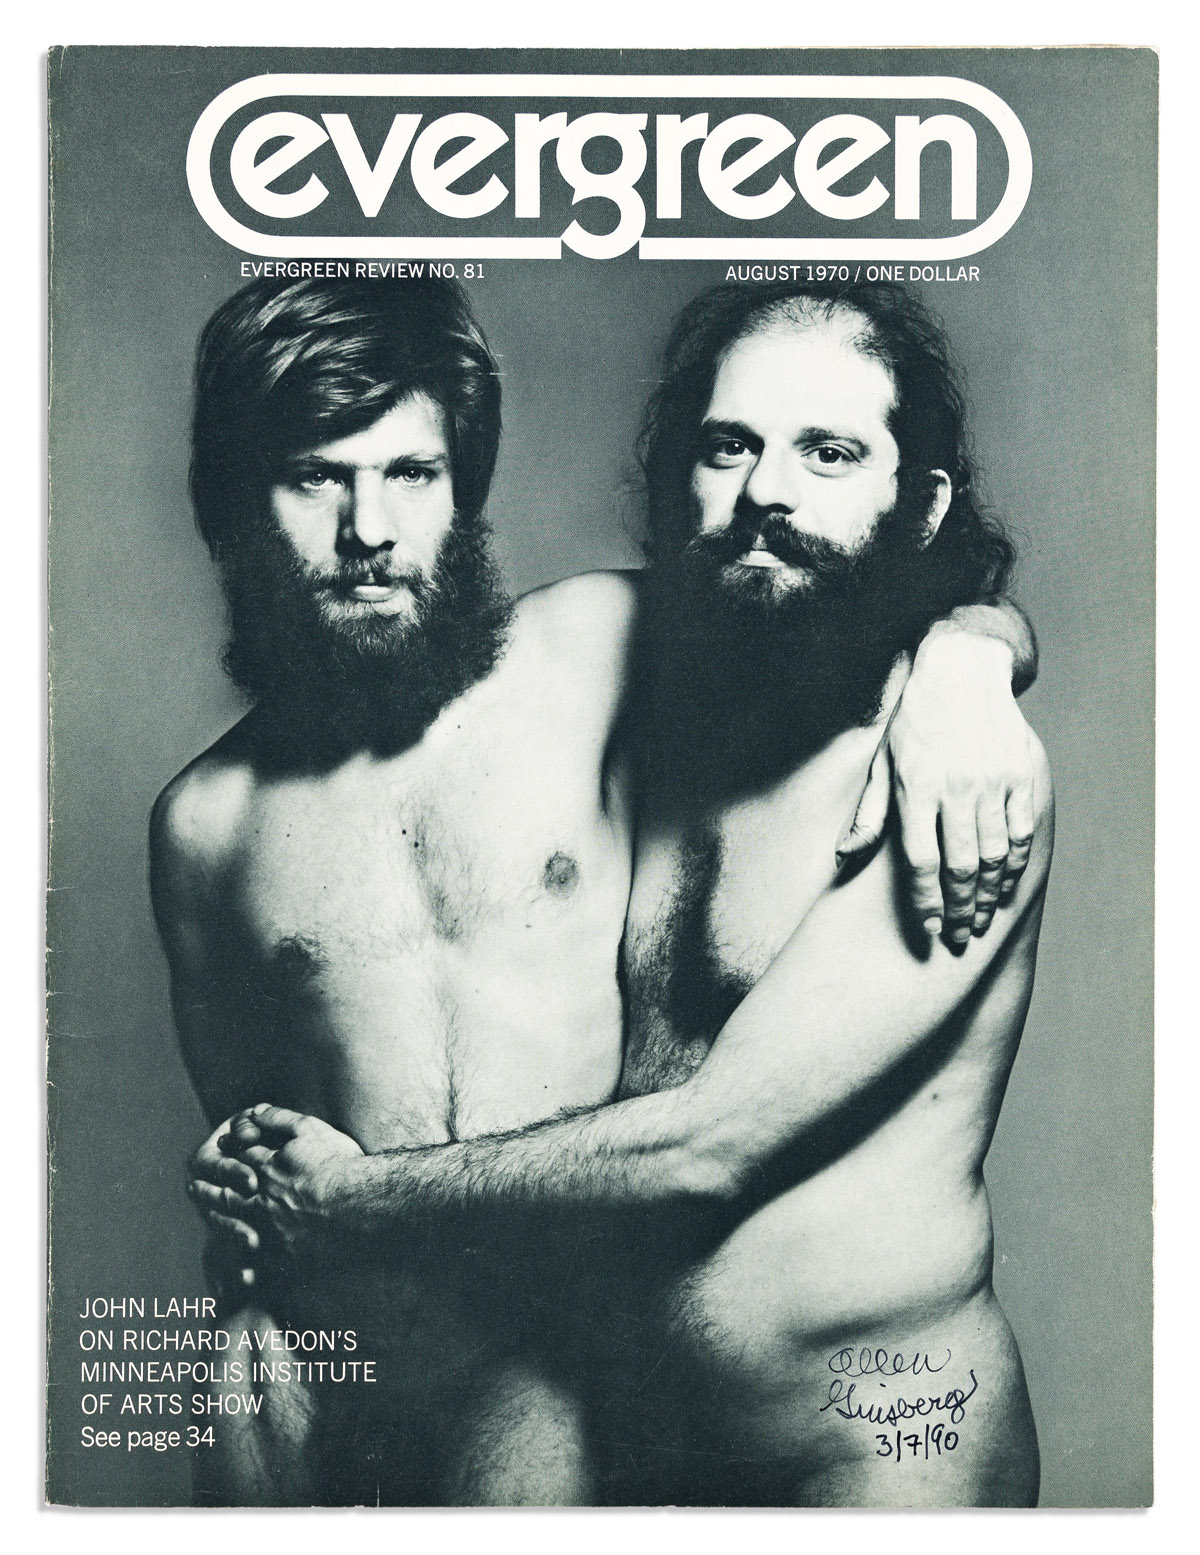 ALLEN GINSBERG (1926-1997) Signature and date on the cover of the August, 1970 issue of Evergreen magazine,